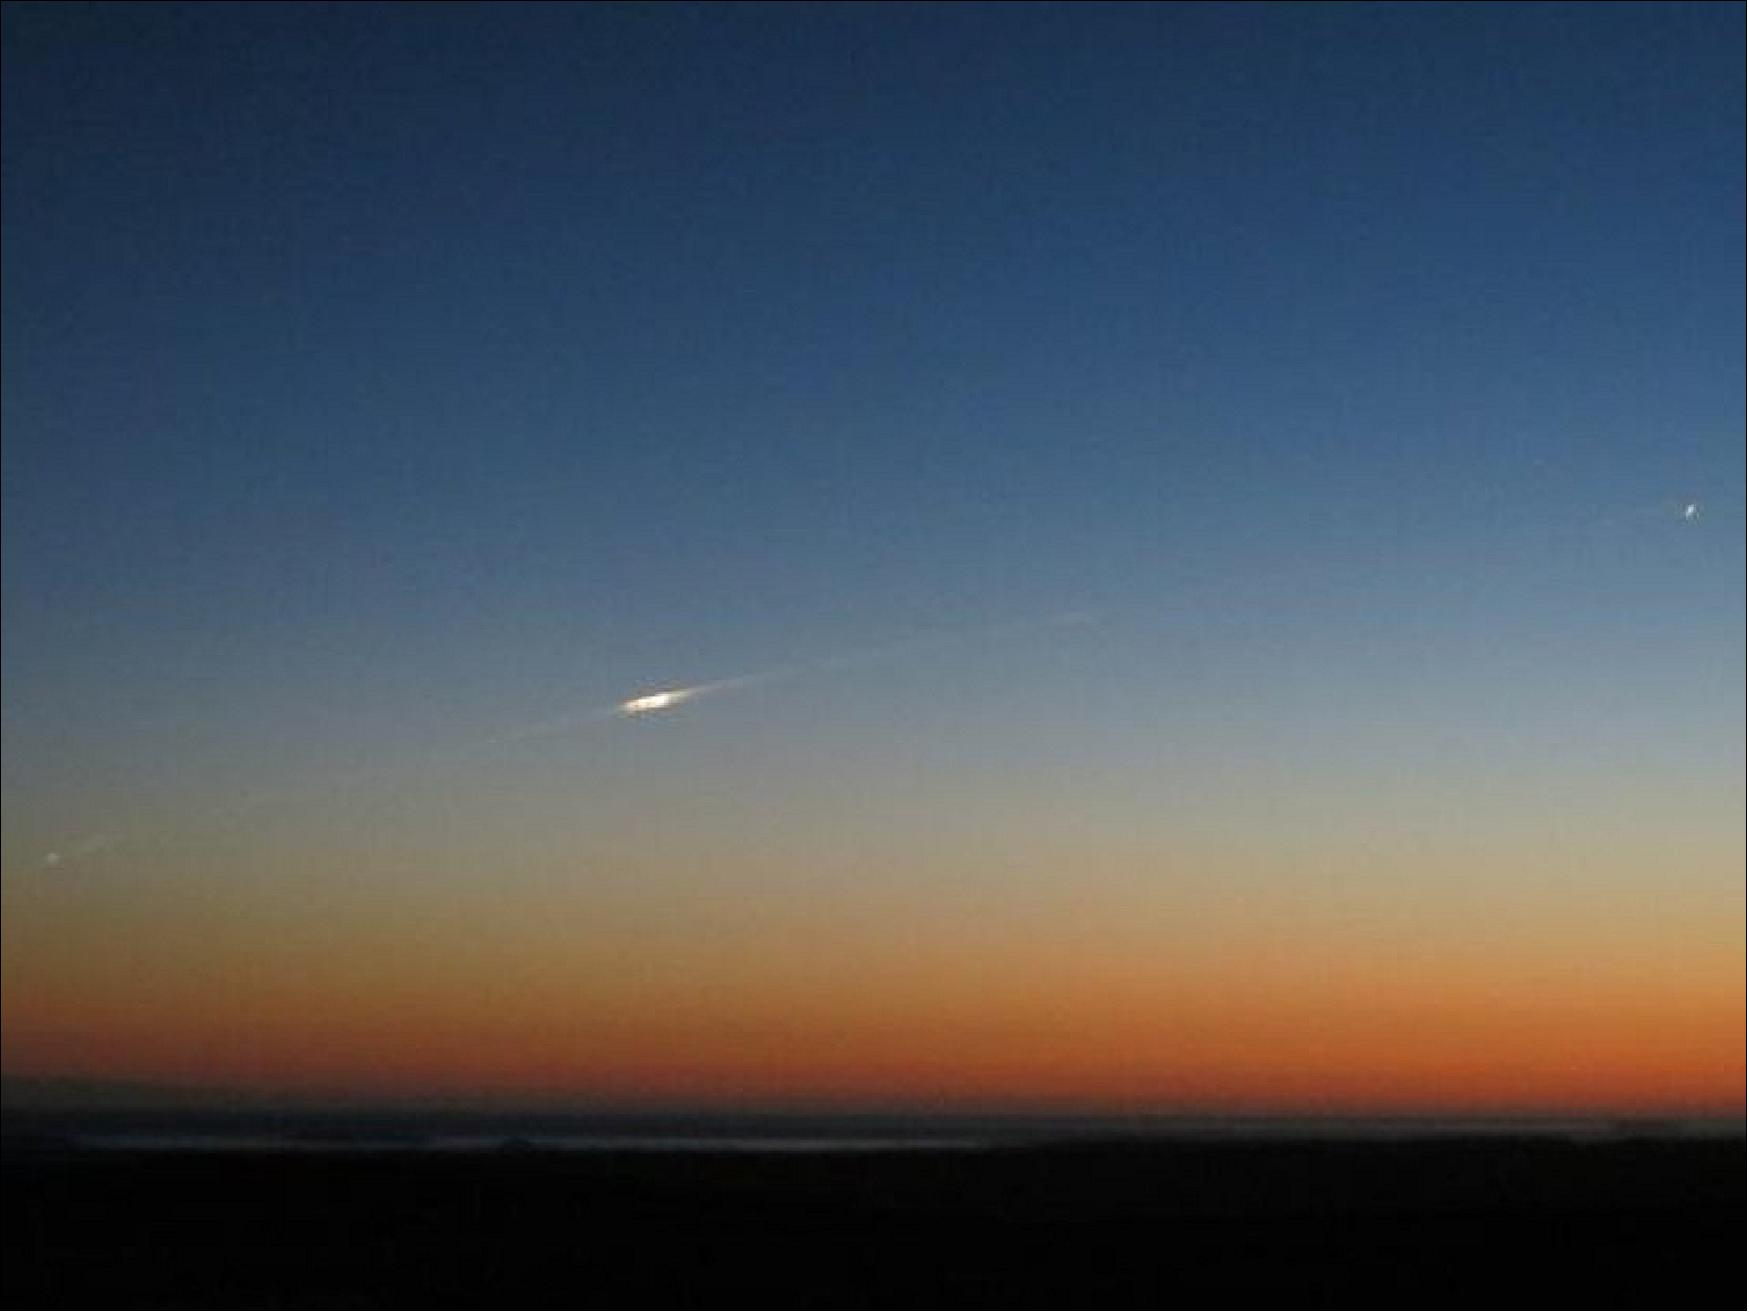 Figure 31: Photo of GOCE reentering the atmosphere taken by Bill Charter in the Falklands at 21:20 local time on 11 November. Posted on Twitter, Bill wrote, "Driving southwards at dusk, it appeared with bright smoke trail and split in 2 before splitting again into more and going on north." (image credit: Bill Carter)